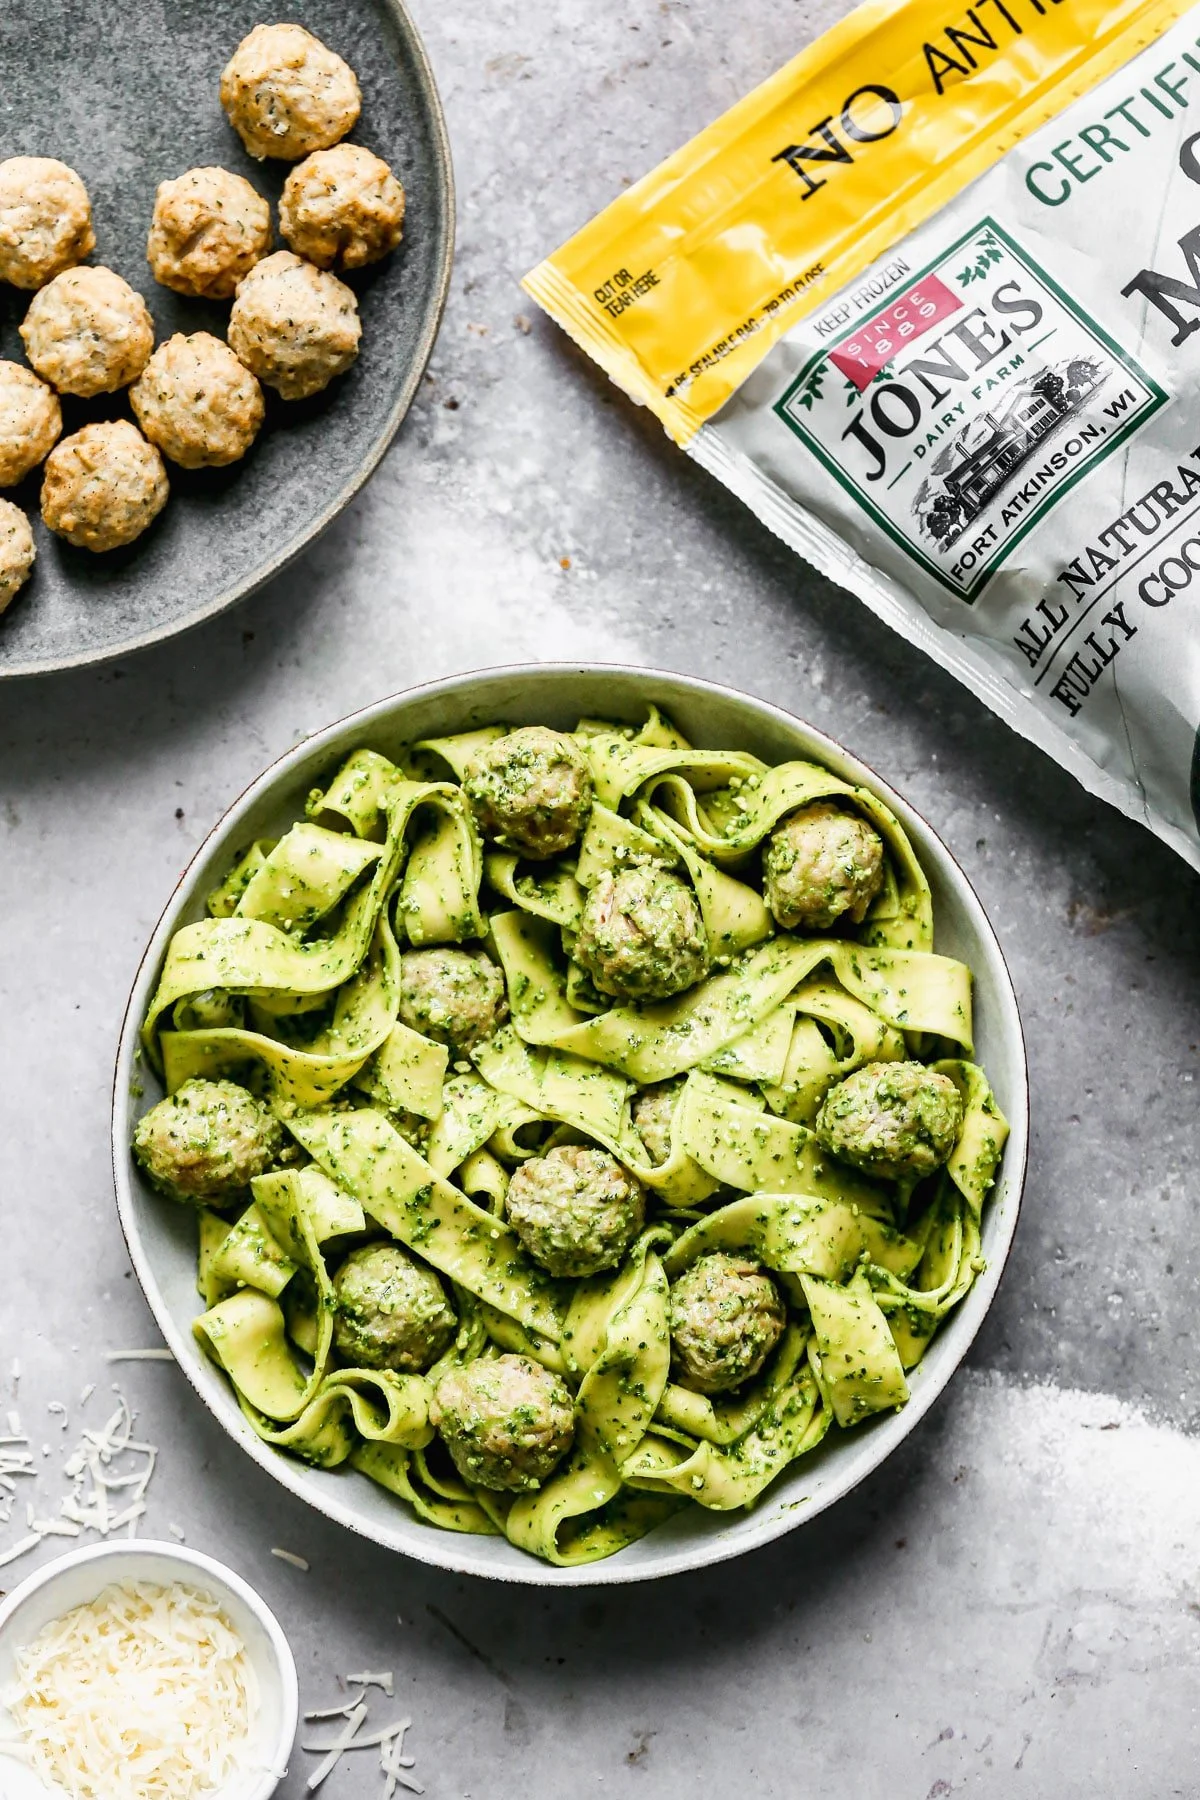 Twirly noodles tossed in a five-minute kale pesto, tender chicken meatballs, and plenty of nutty parmesan are the makings of our new favorite throw-it-together weeknight meal – Kale Pesto Pasta. Just because it's winter, doesn't mean we have to leave homemade pesto behind. Swapping out hearty wintery kale for a portion of the pesto brings a little seasonal aspect to our pesto and using crunchy almonds instead of pine nuts make this easy meal pocket-friendly as well.&nbsp;